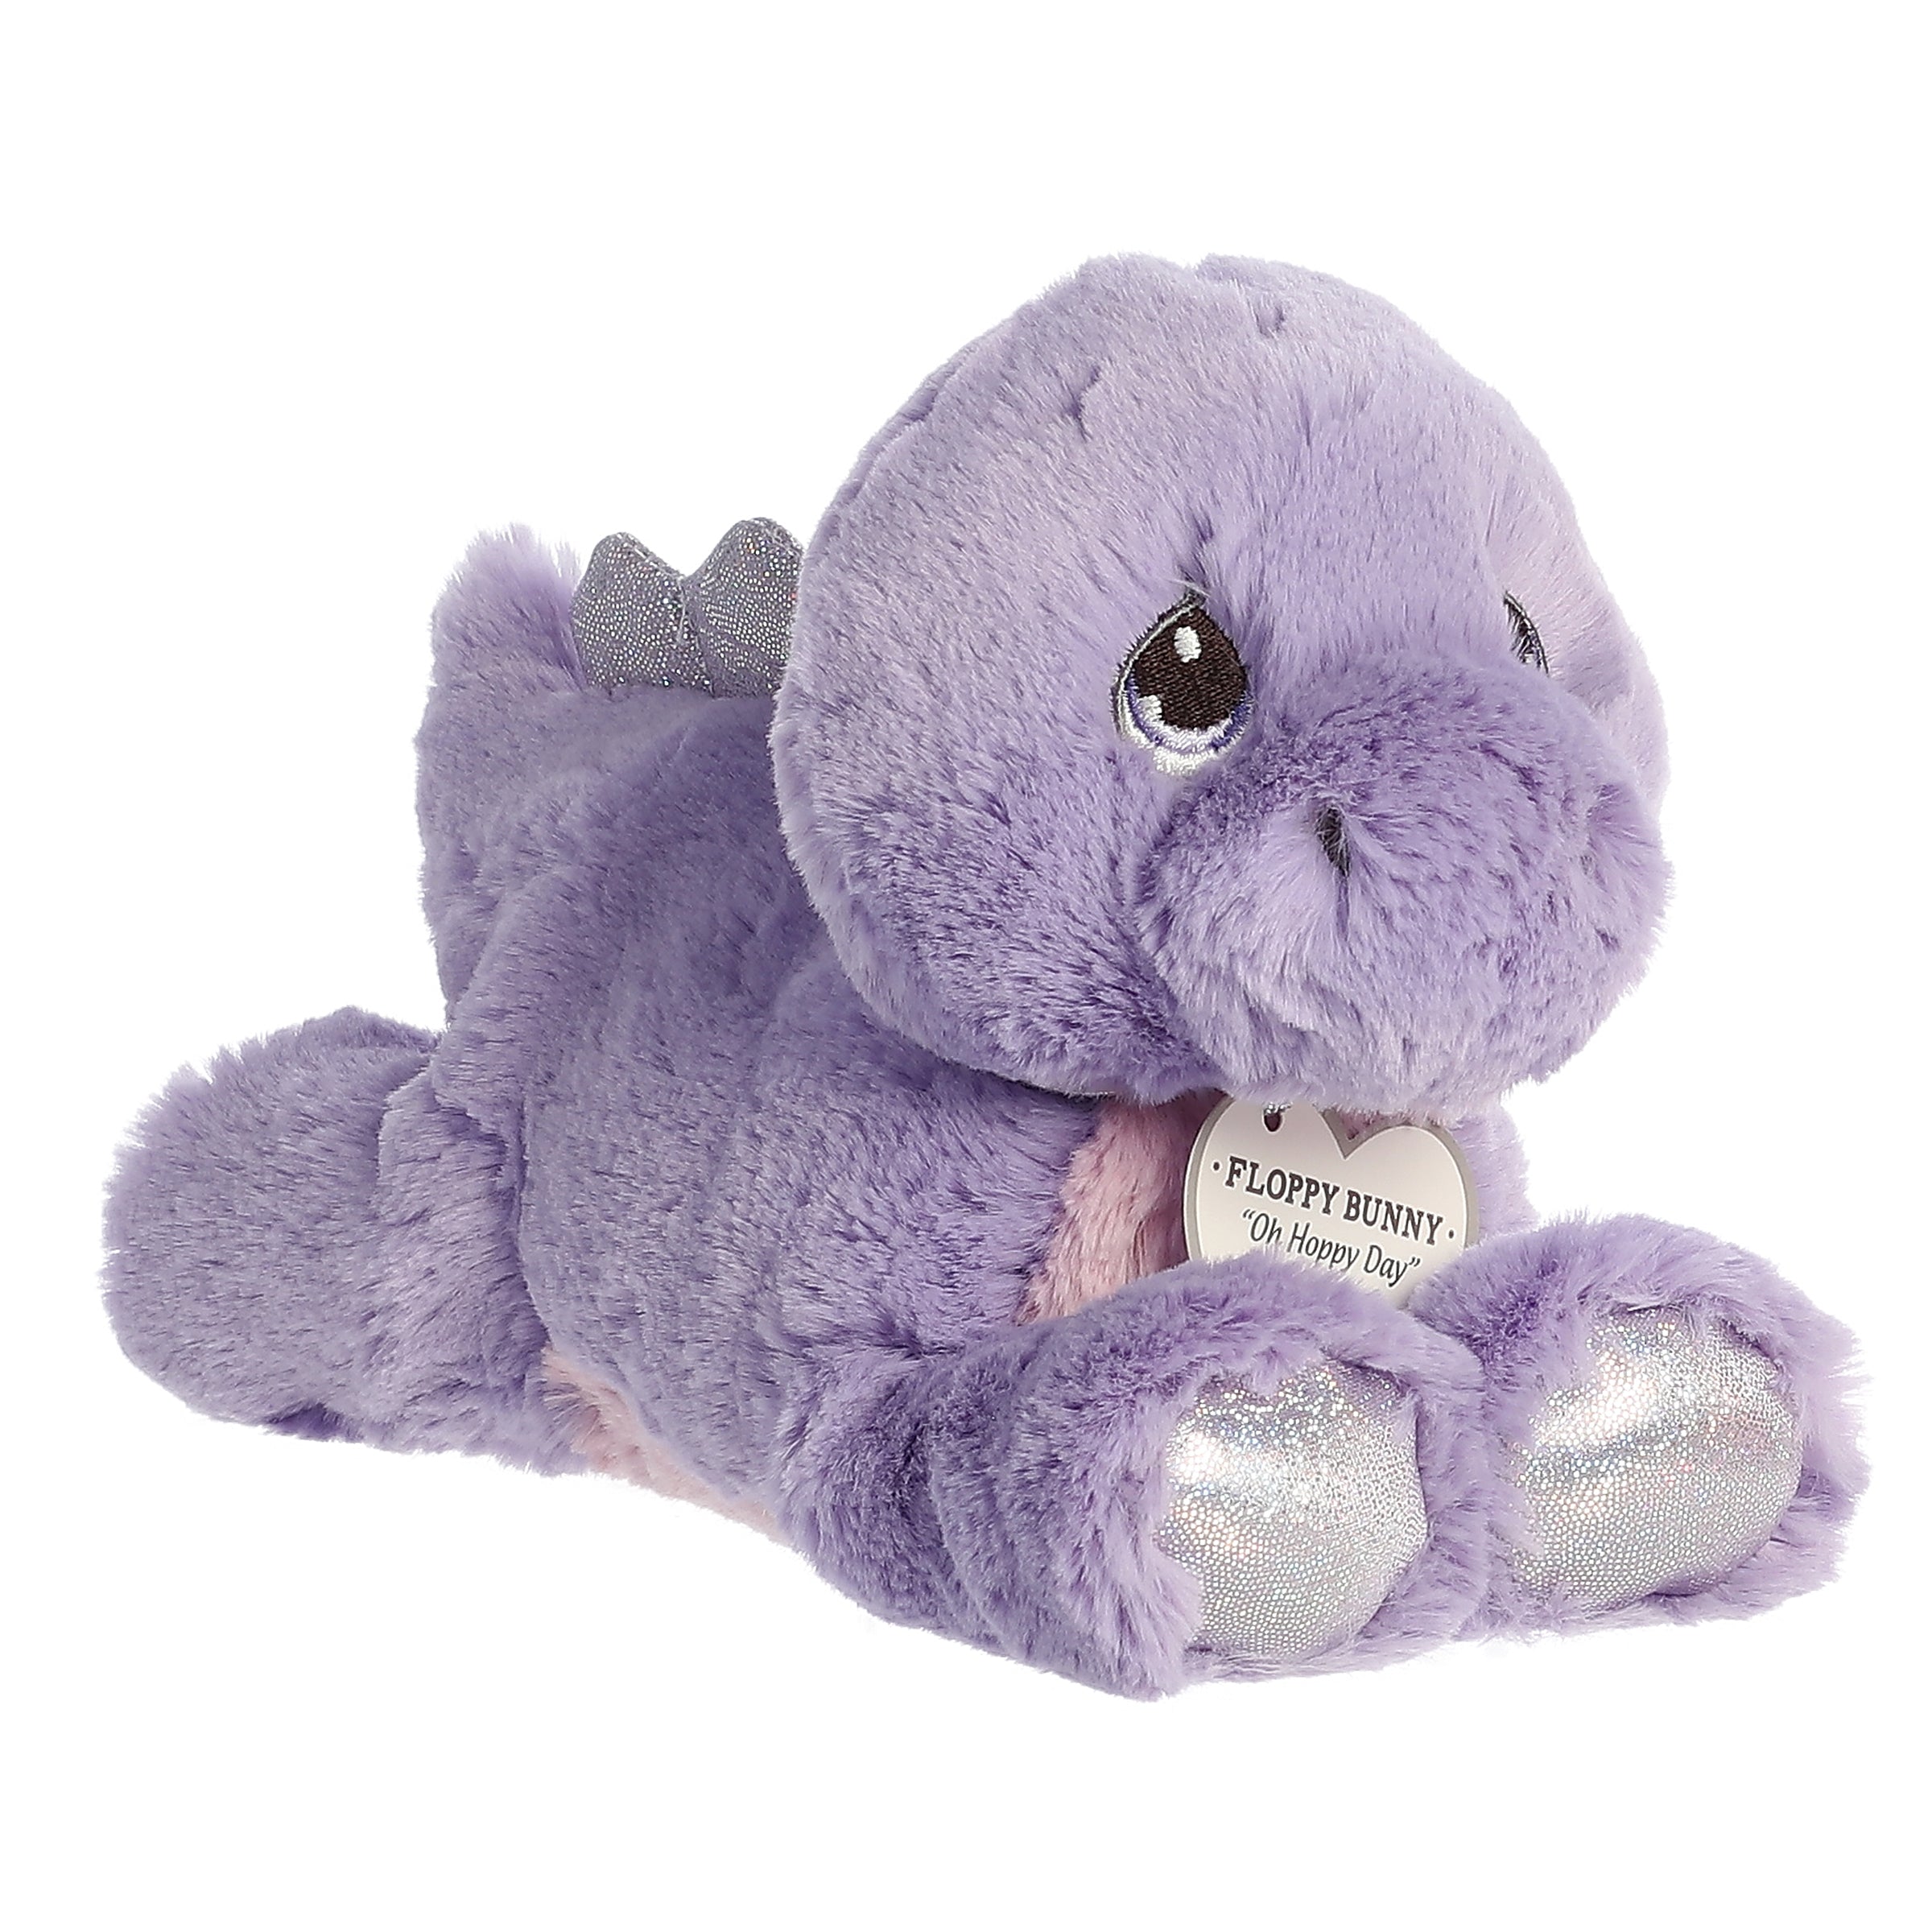 A laying down purple stegosaurus dino plush with tear-drop eyes and an inspirational tag around its neck.